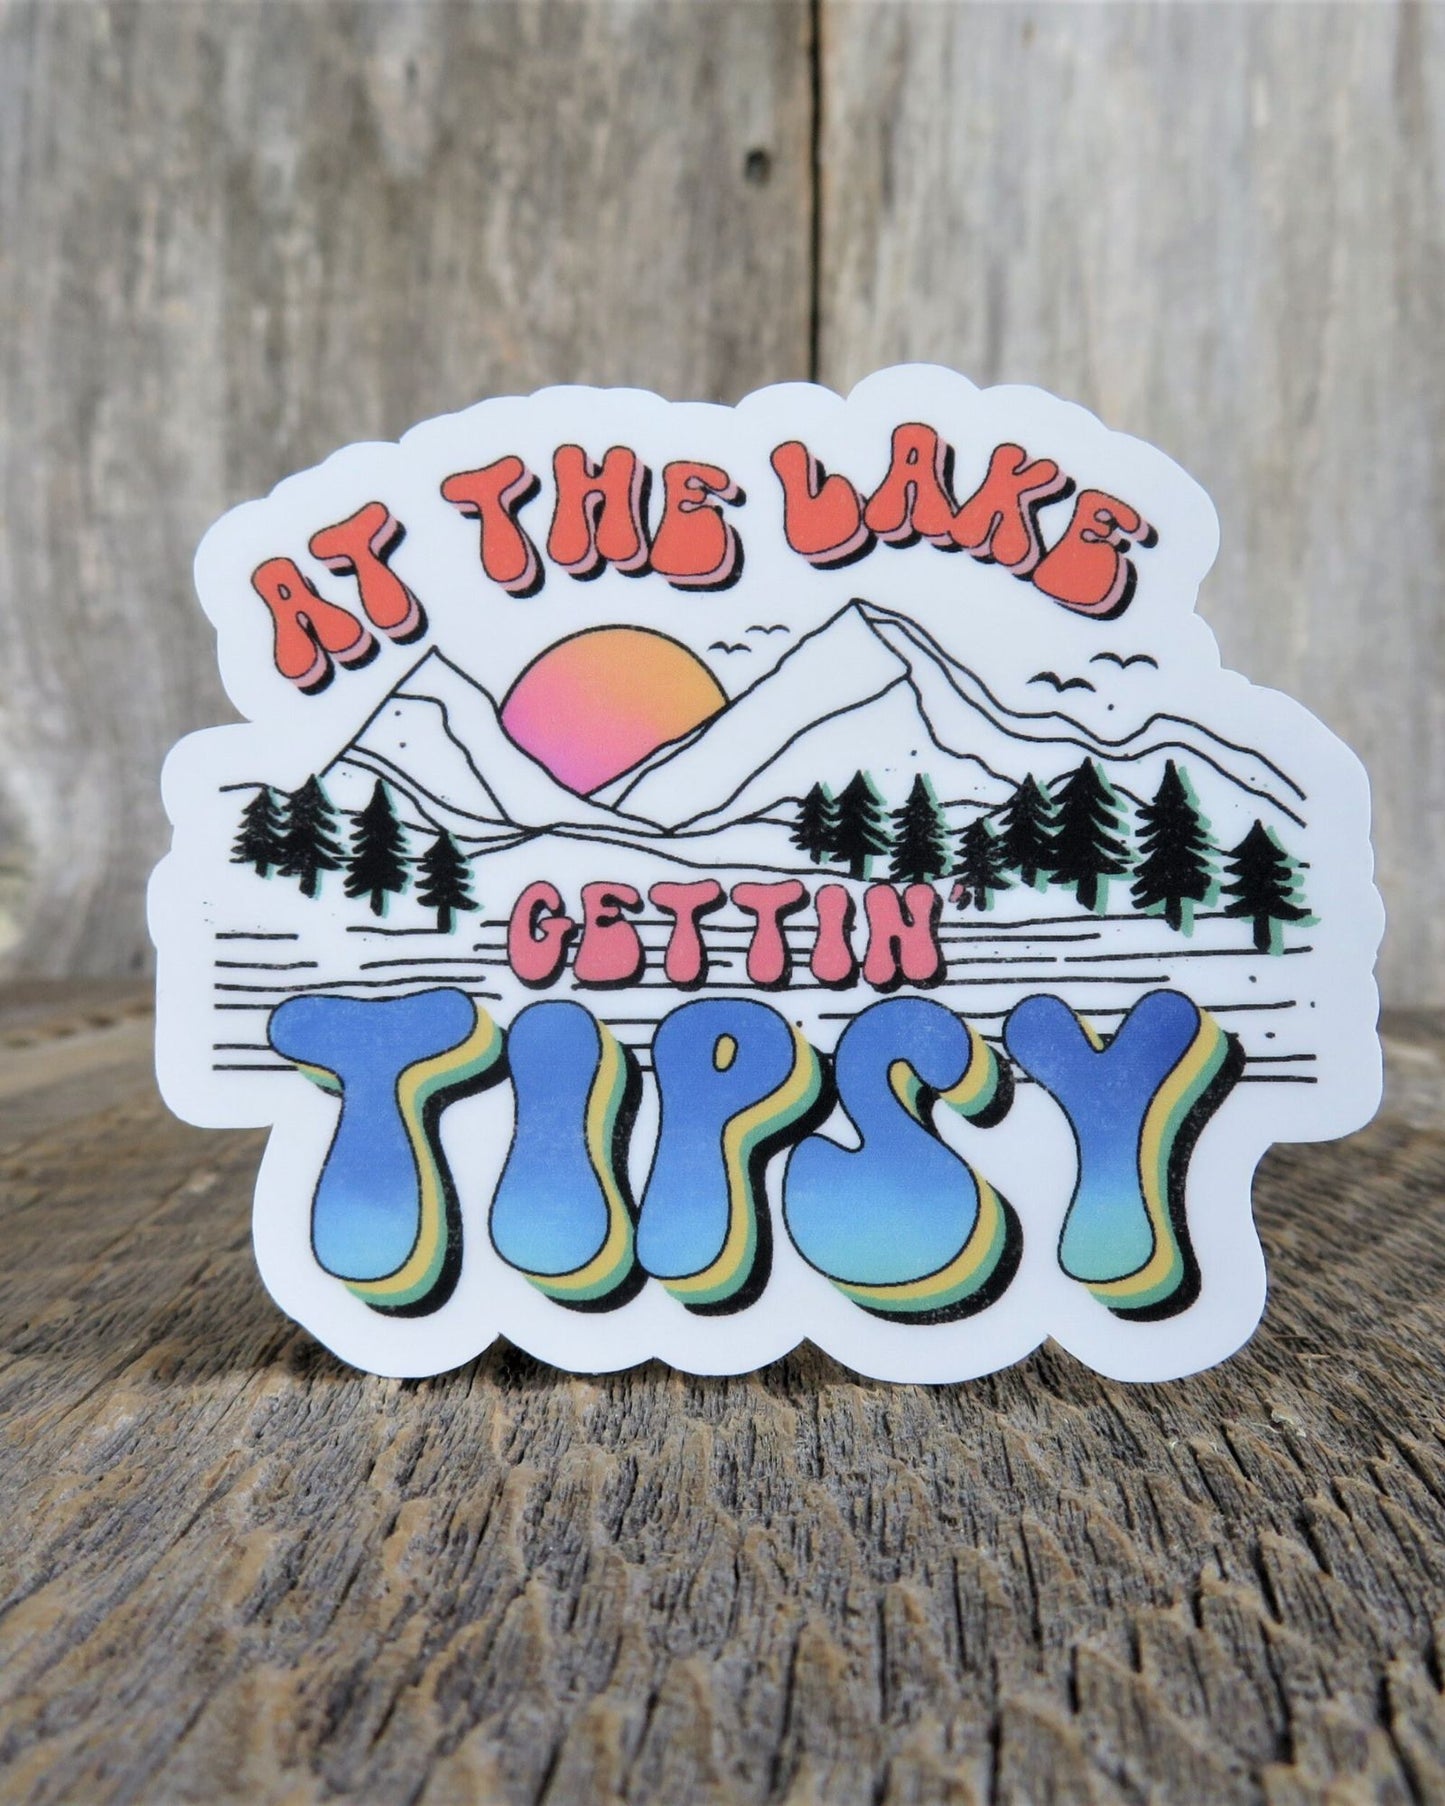 At the Lake Getting Tipsy Sticker Waterproof Lake Lover Sticker Day Drinking Mountains Woods Camping Outdoors Retro Colors